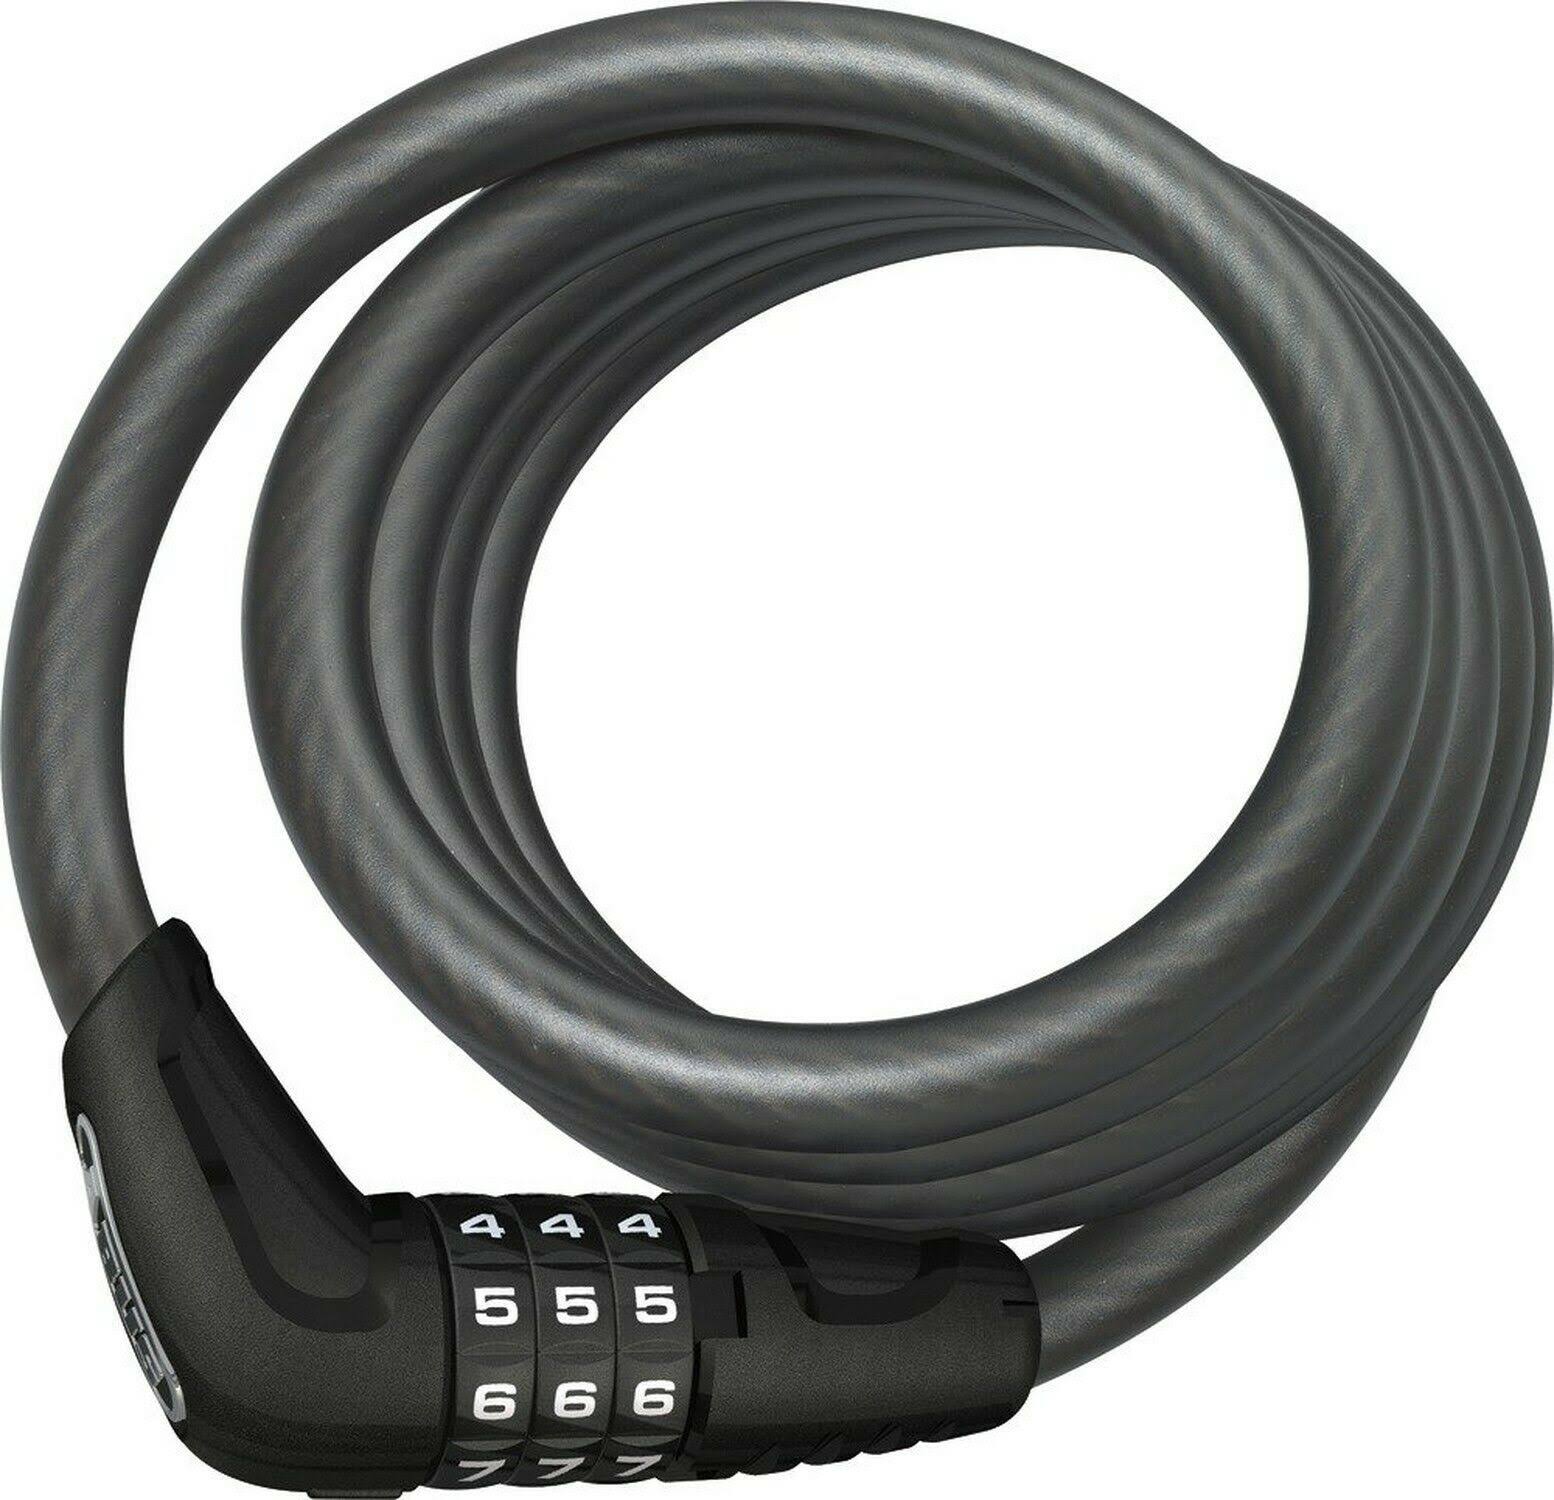 Abus Star 4508 Combination Coiled Cable Lock - Black, 150cm x 8mm